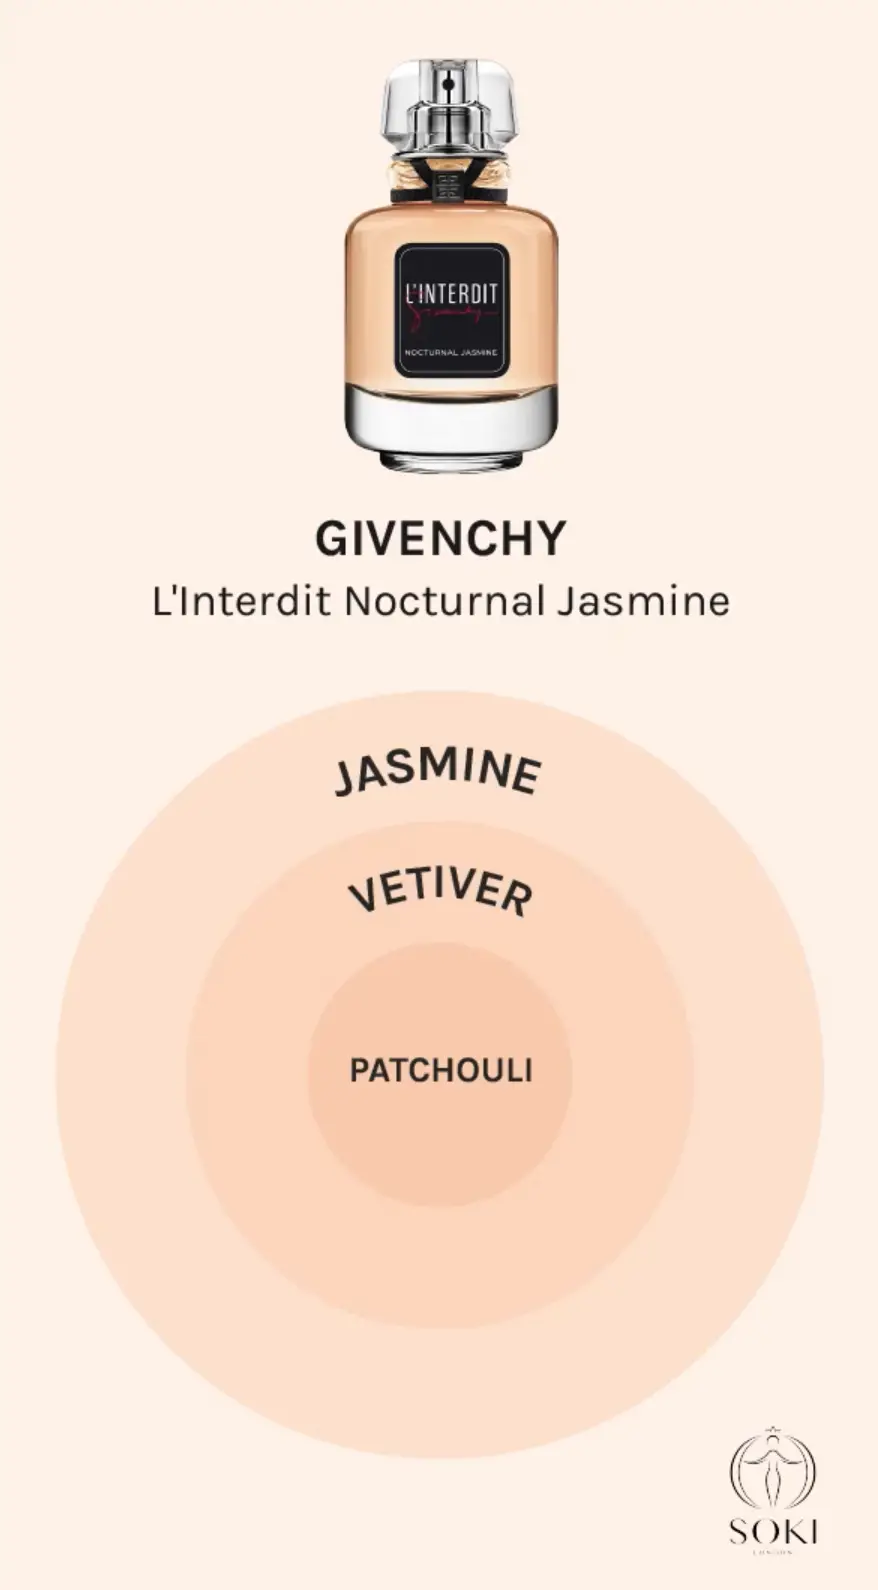 Givenchy L'interdit Nocturnal Jasmine Perfume Notes